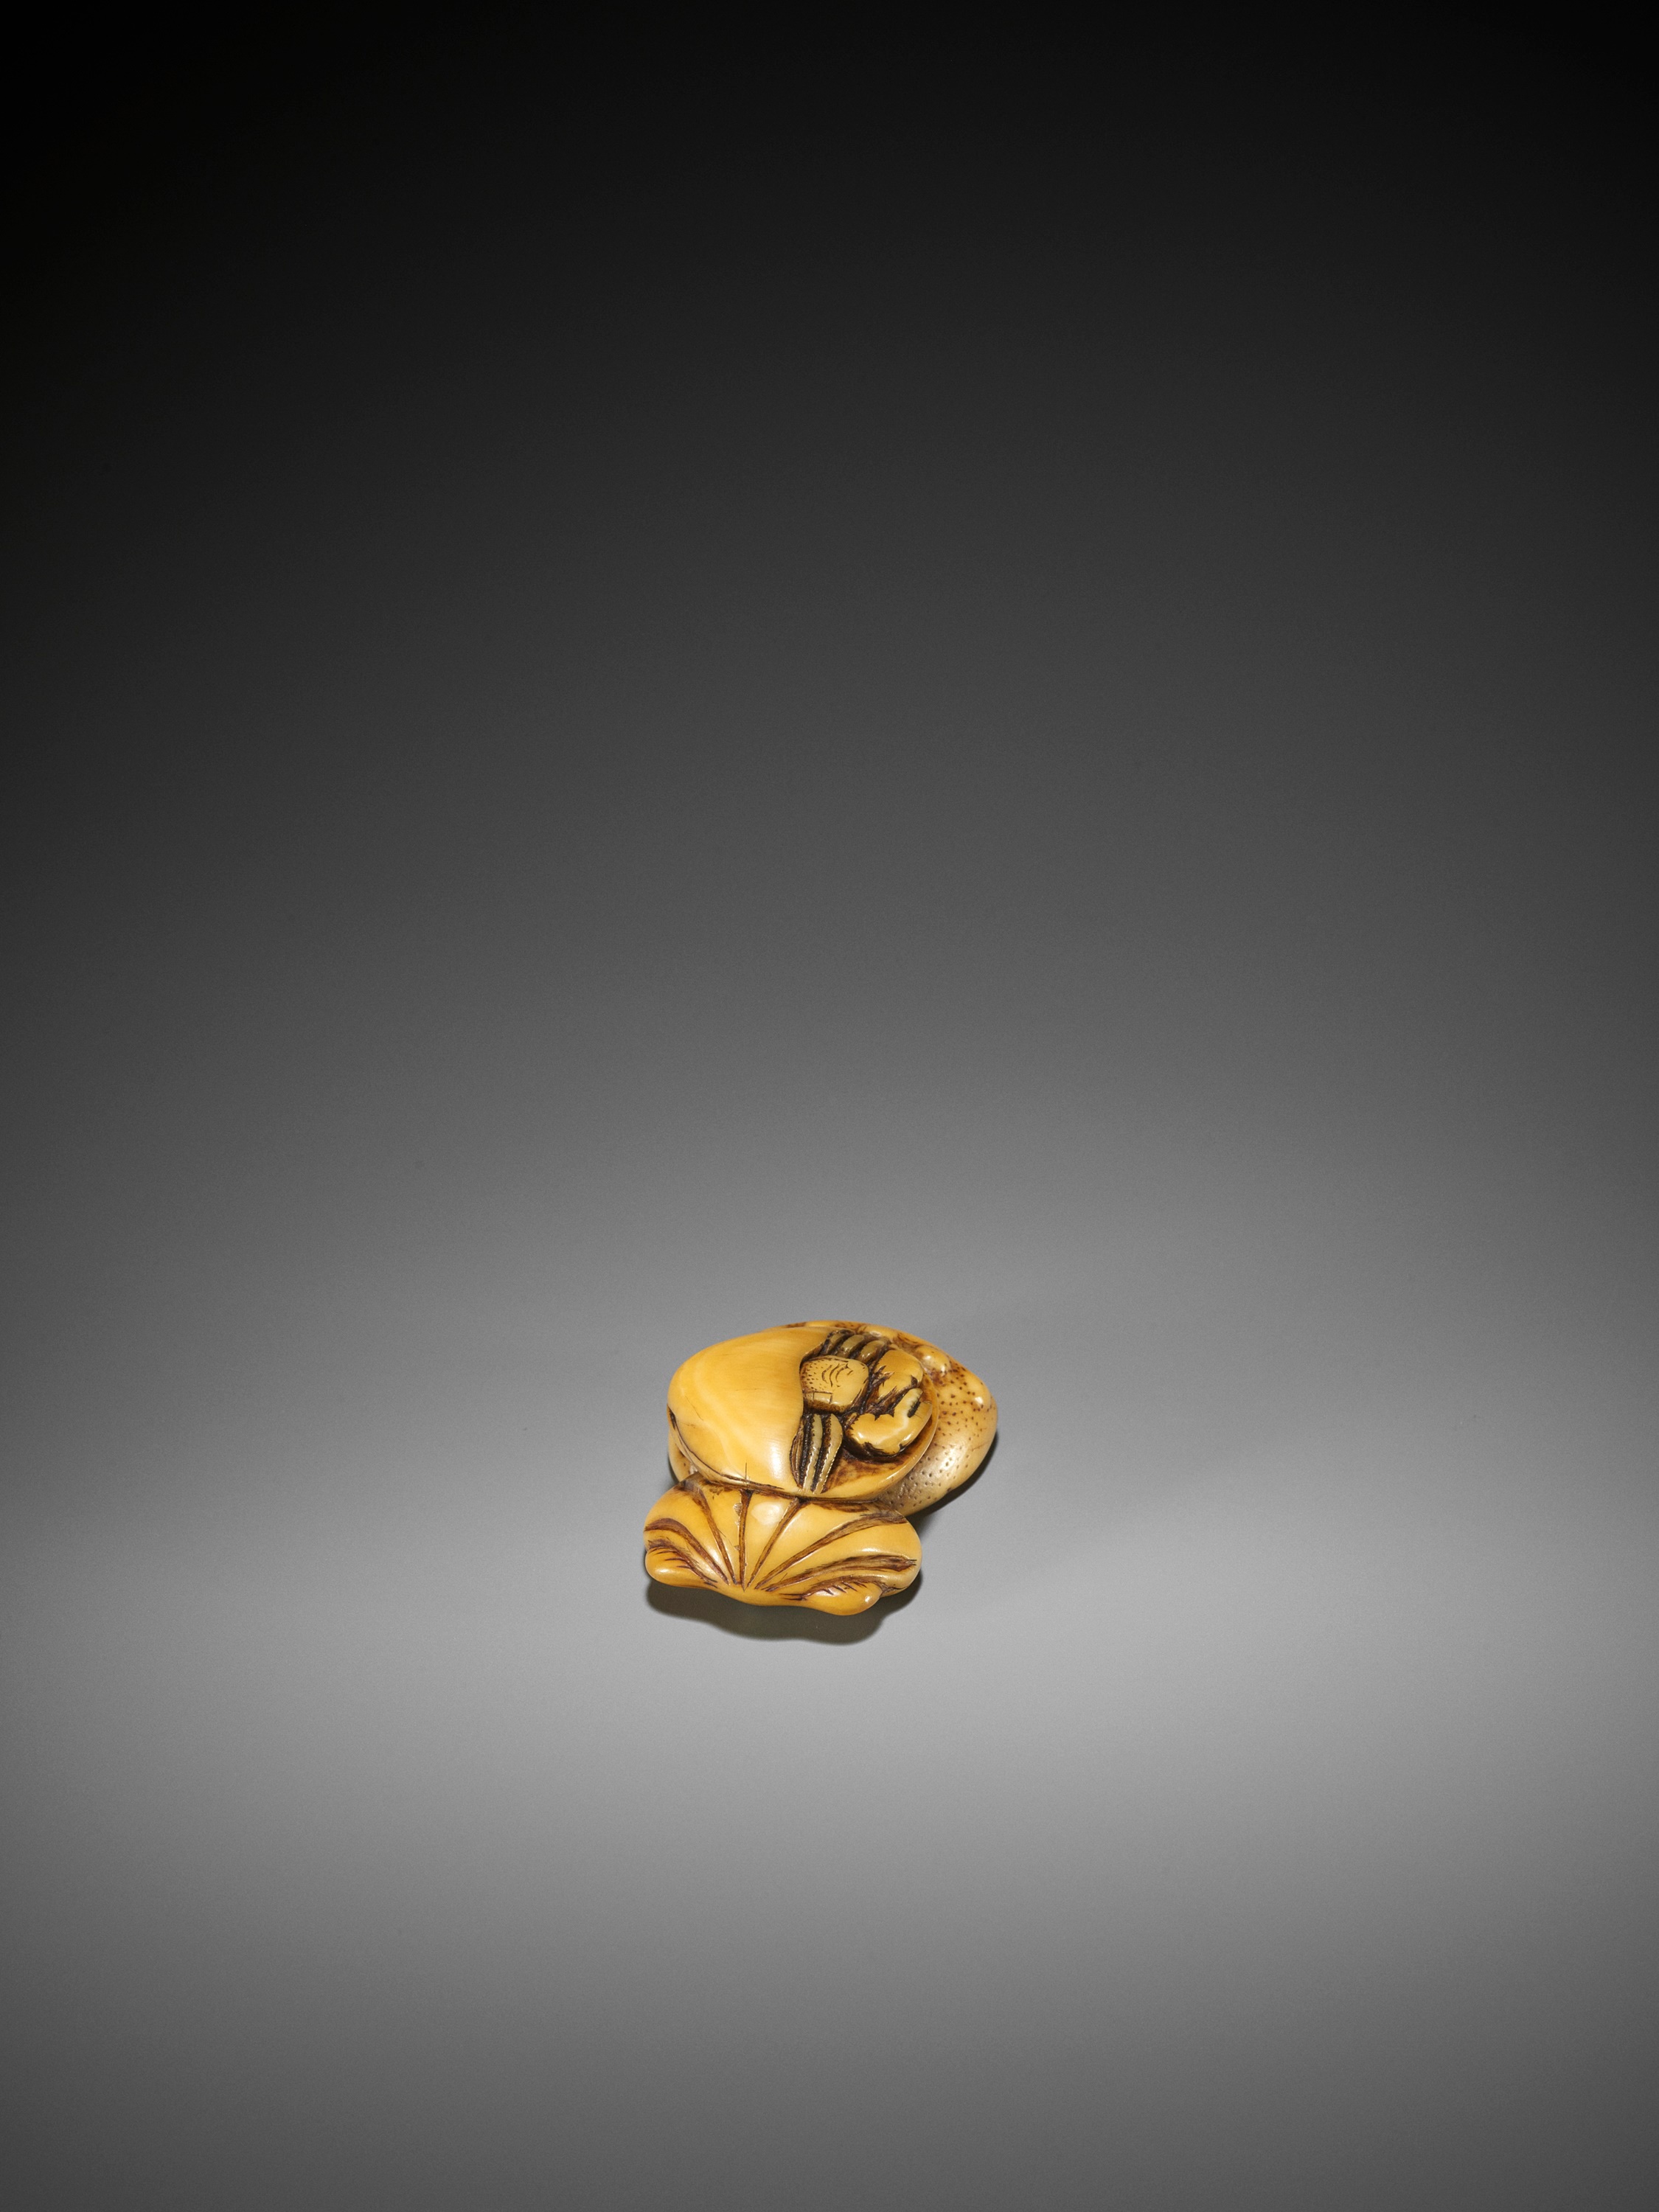 AN EARLY IVORY NETSUKE OF A HERMIT CRAB AND SHELLS - Image 7 of 8